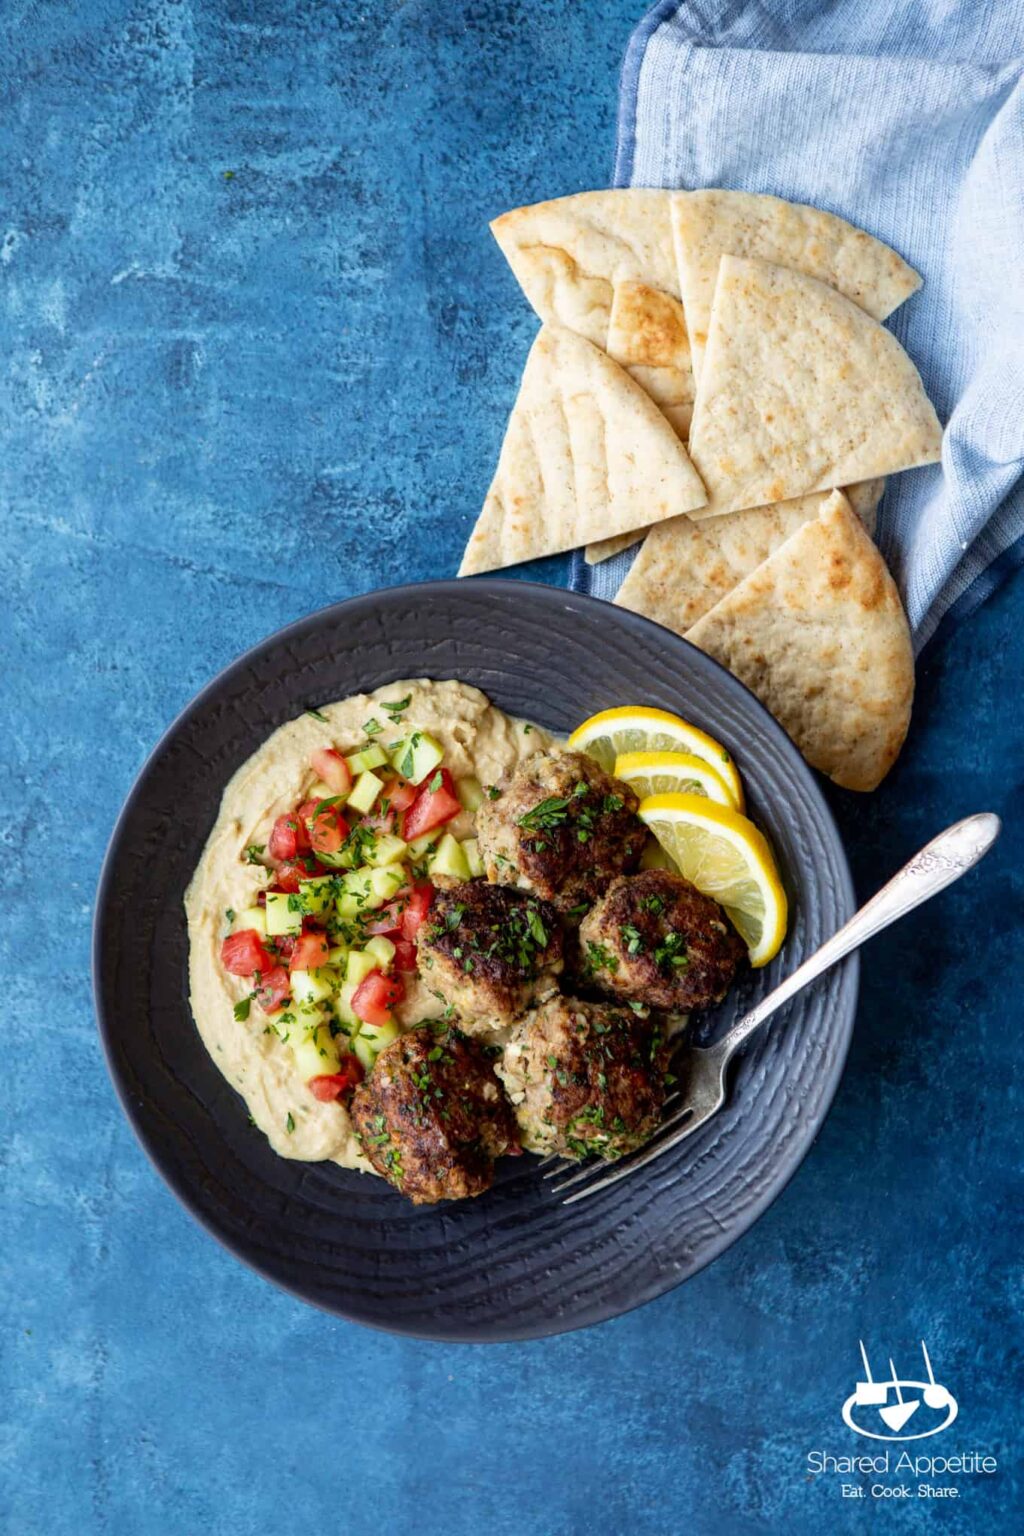 Greek Chicken Meatballs with Hummus and Israeli Salad - Shared Appetite